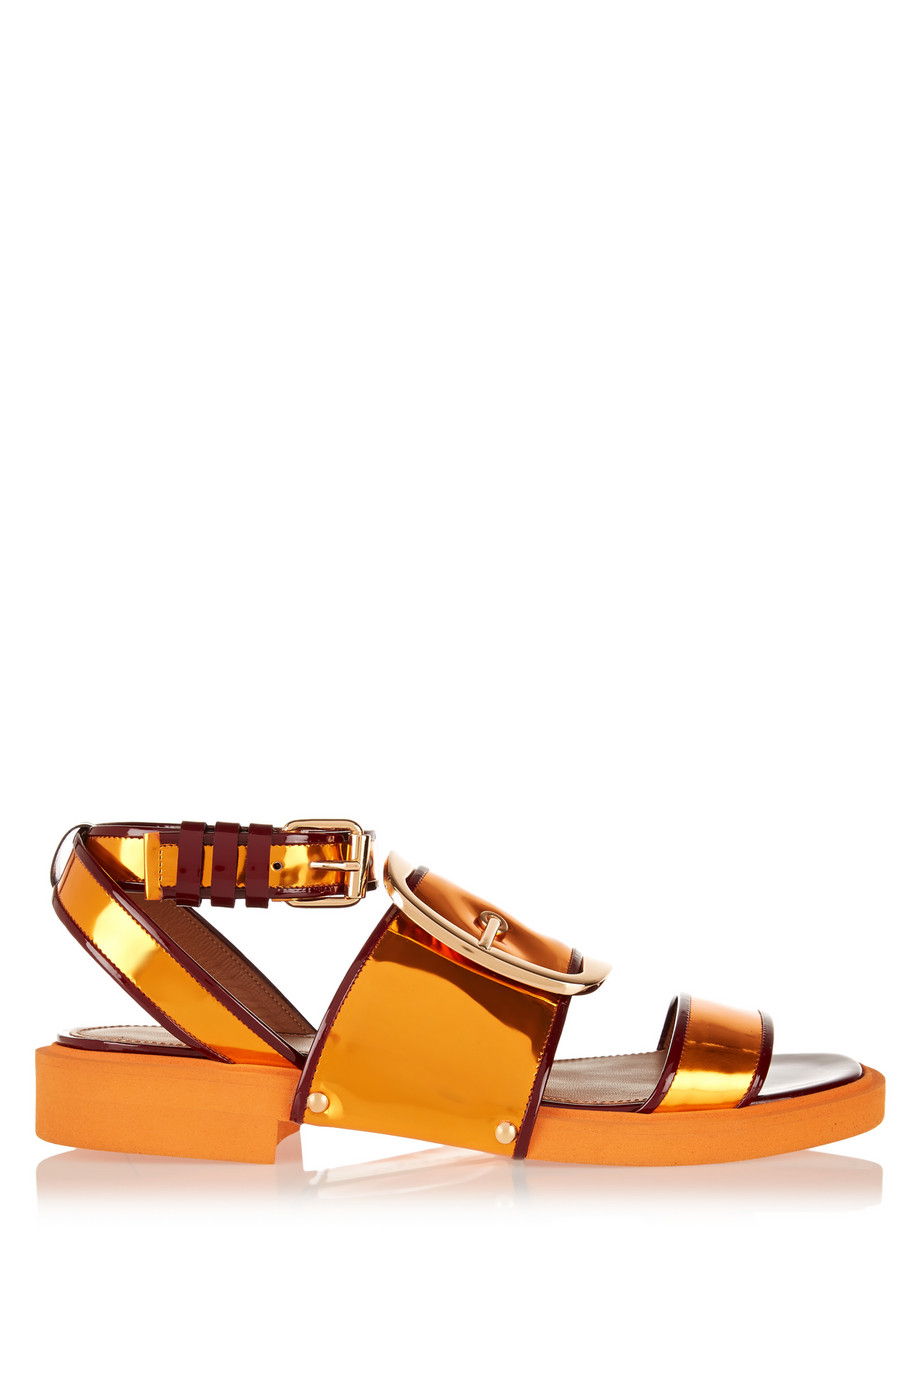 Givenchy Oversized Buckle Sandals In Metallic Leather in Orange | Lyst